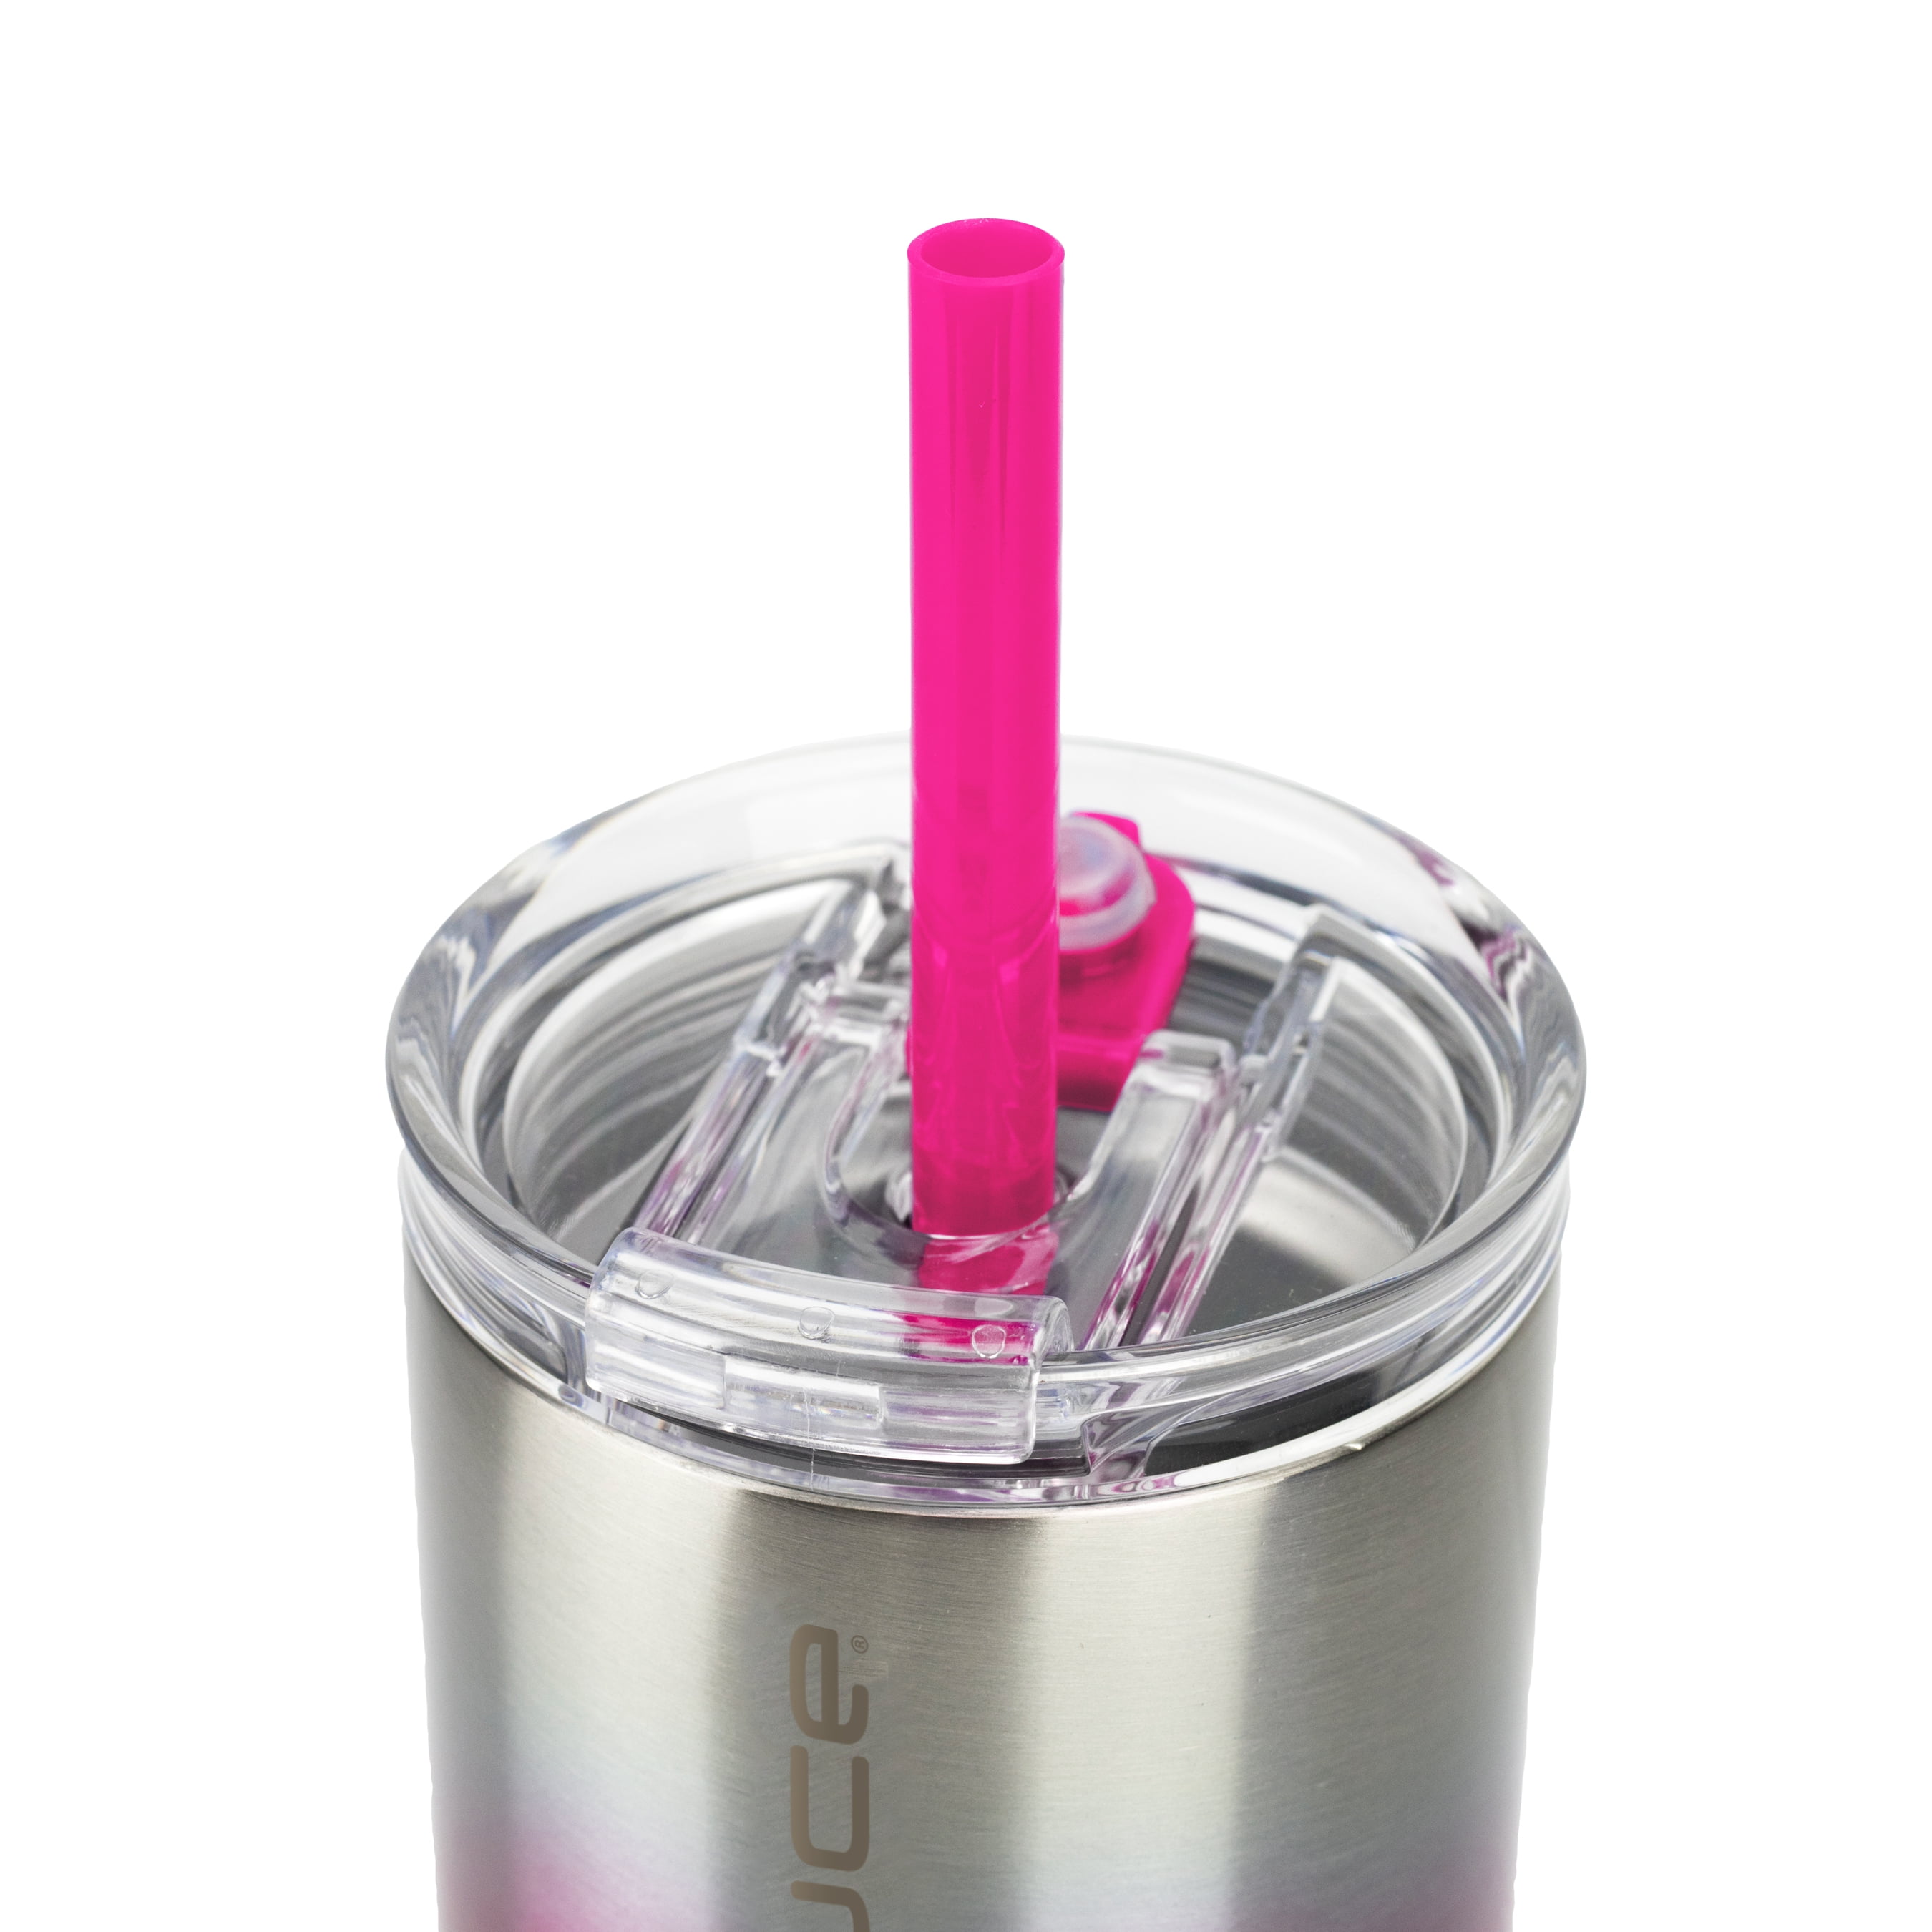 Reduce Coldee 14oz Stainless Steel Kids Tumbler with 3-in-1 Straw Lid,  Stainless Steel 